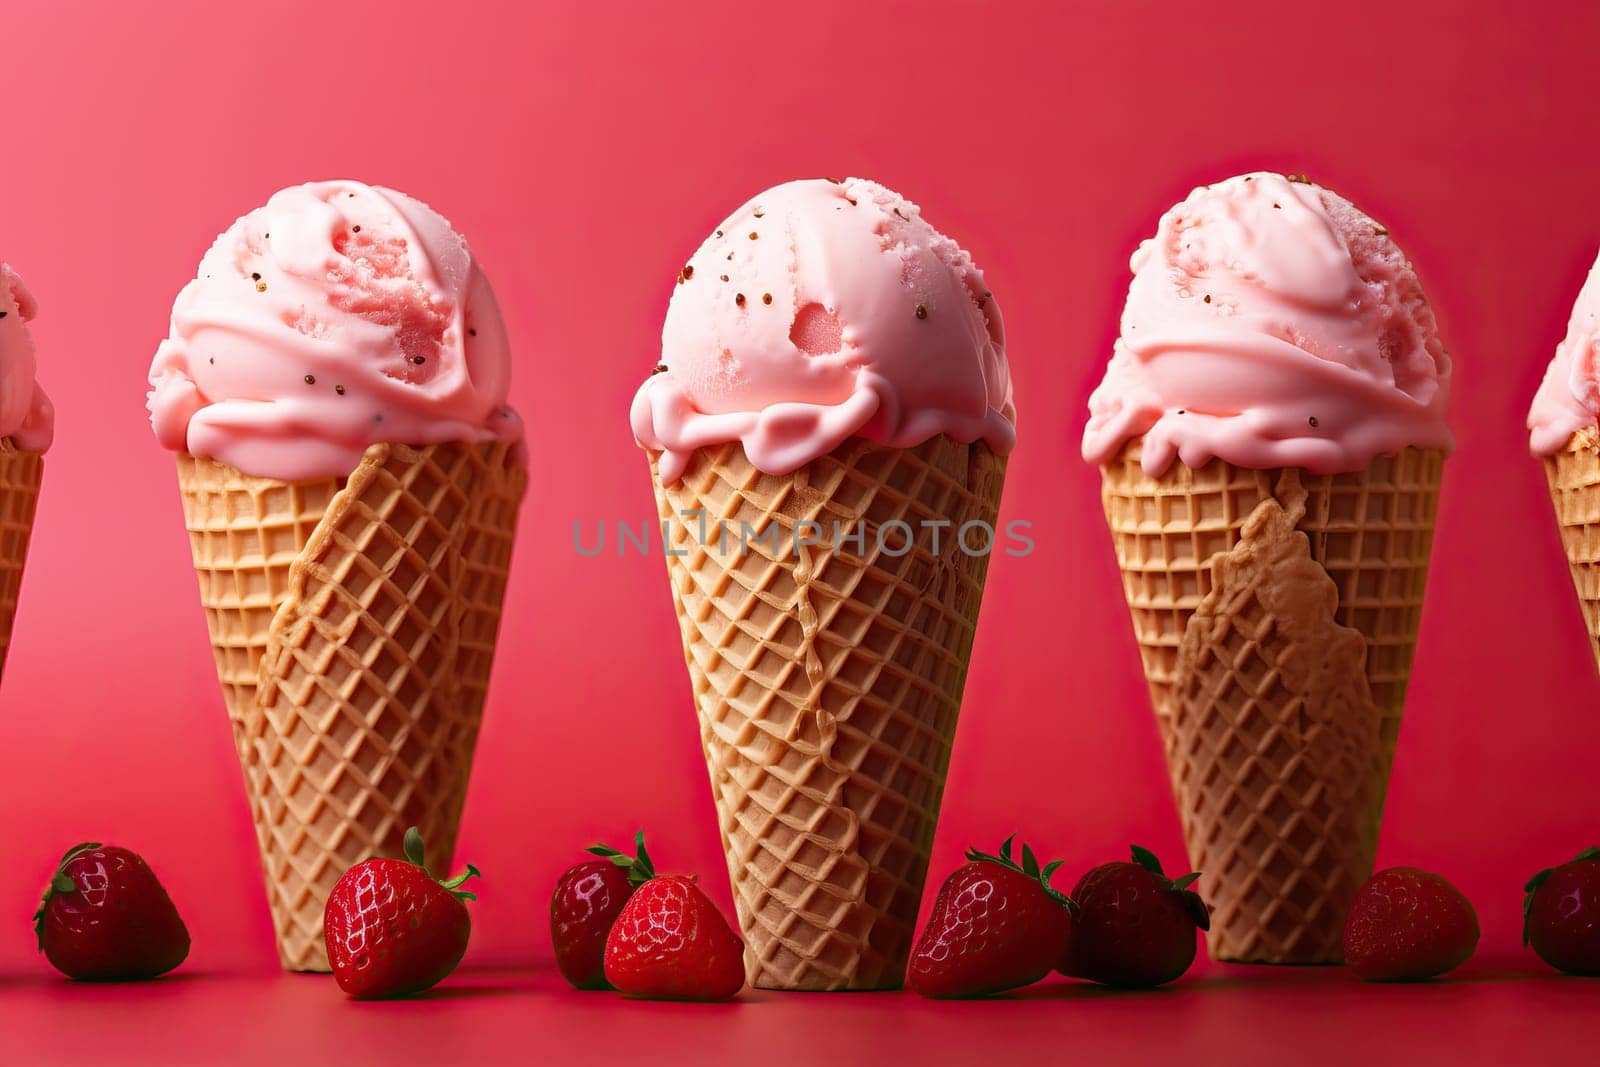 Strawberry ice cream in a waffle cup on a red background with fresh strawberries.